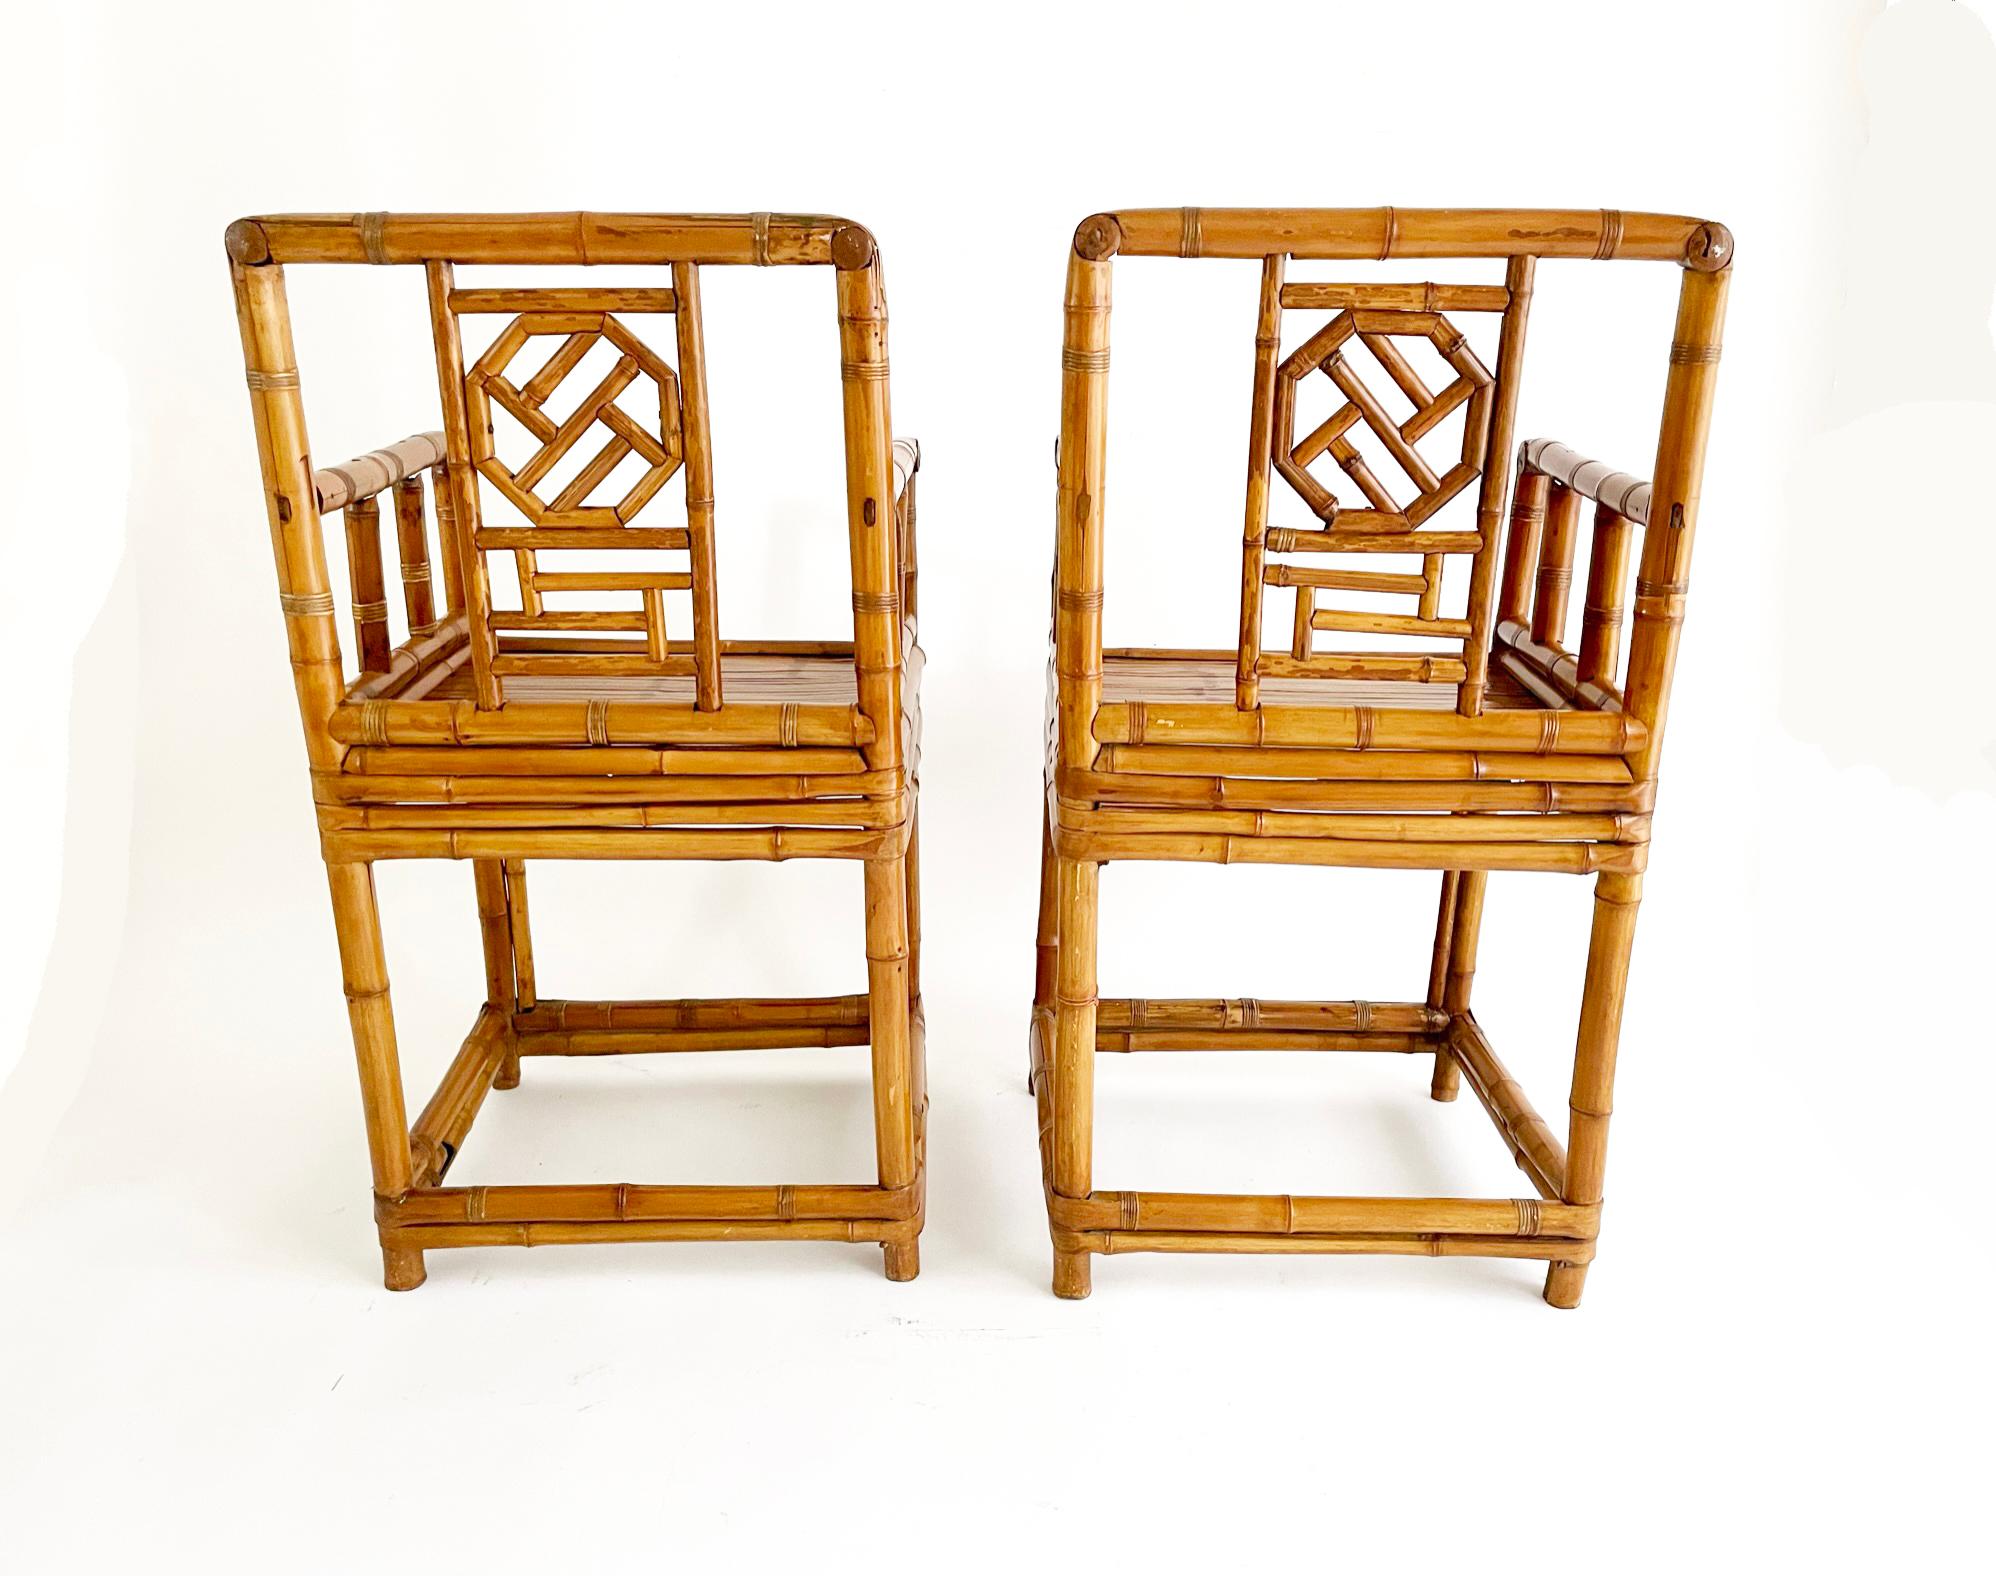 Hand-Crafted Pair of Early 20th Century Chinese Bamboo Chairs For Sale